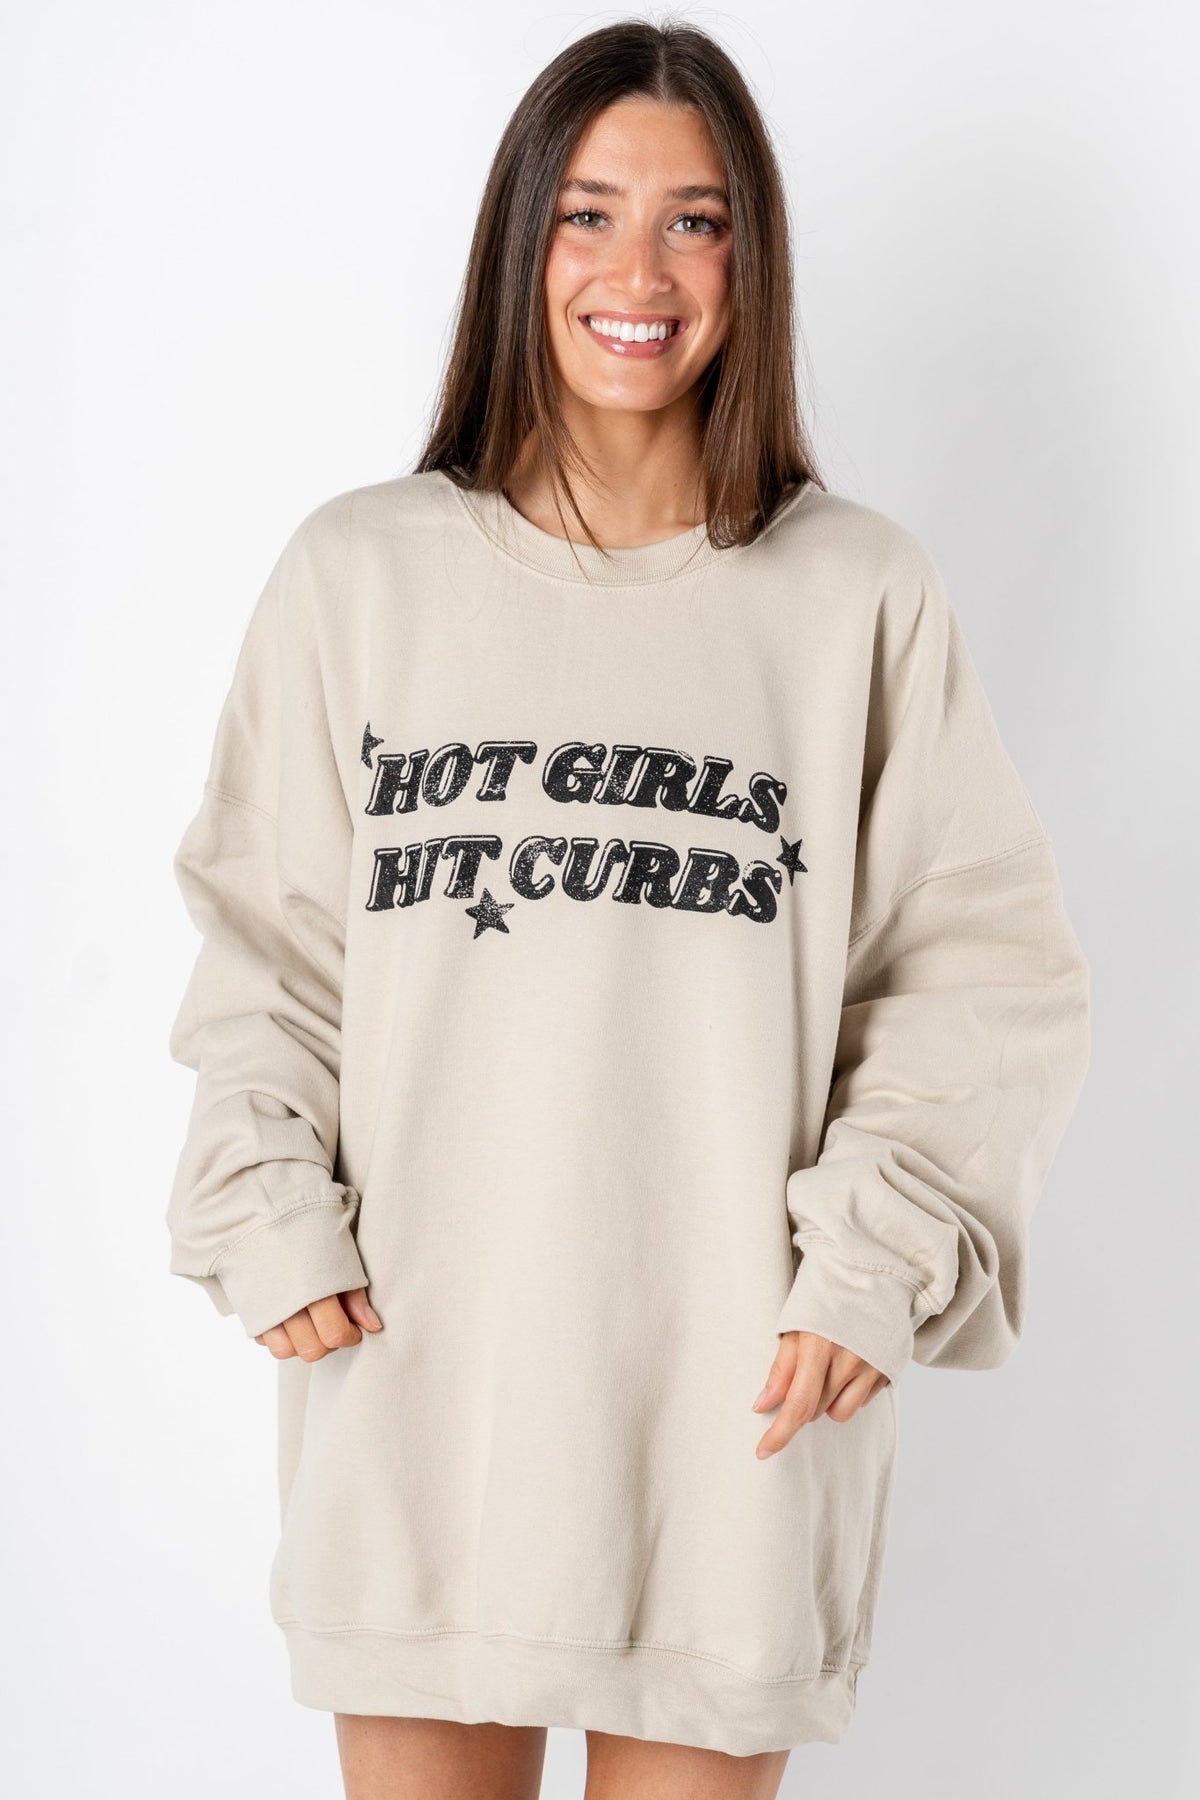 Hot girls hit curbs oversized thrifted sweatshirt sand - Stylish T-shirts - Trendy Graphic T-Shirts and Tank Tops at Lush Fashion Lounge Boutique in Oklahoma City